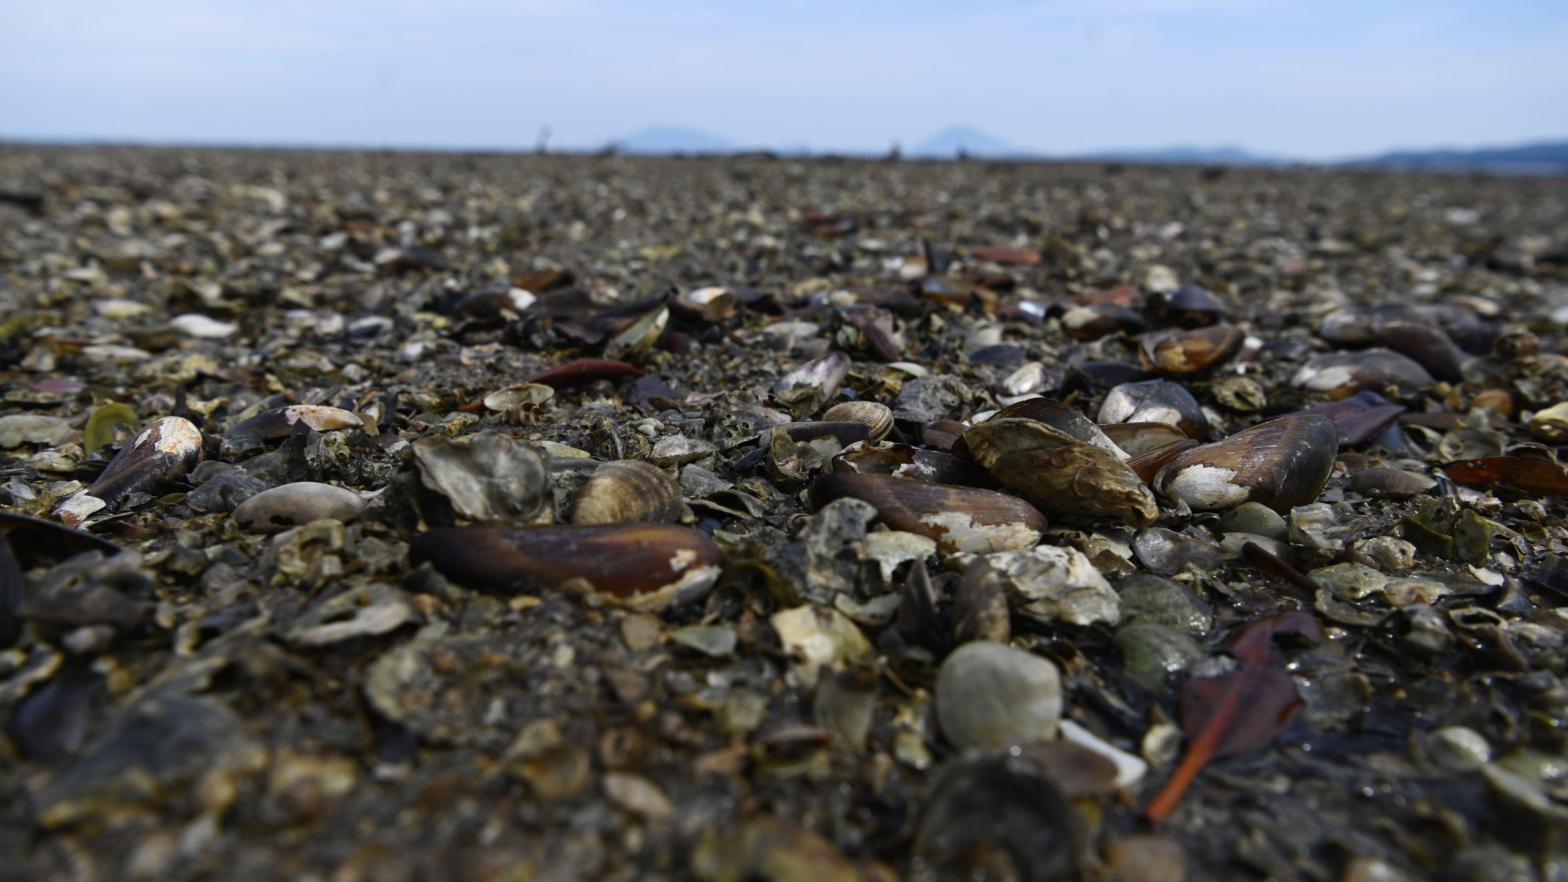 A view of dead mollusks in Conchagua, El Salvador, on November 19, 2019. A similar scene played out in British Columbia this past week. (Photo: Marvin Recinos/AFP, Getty Images)